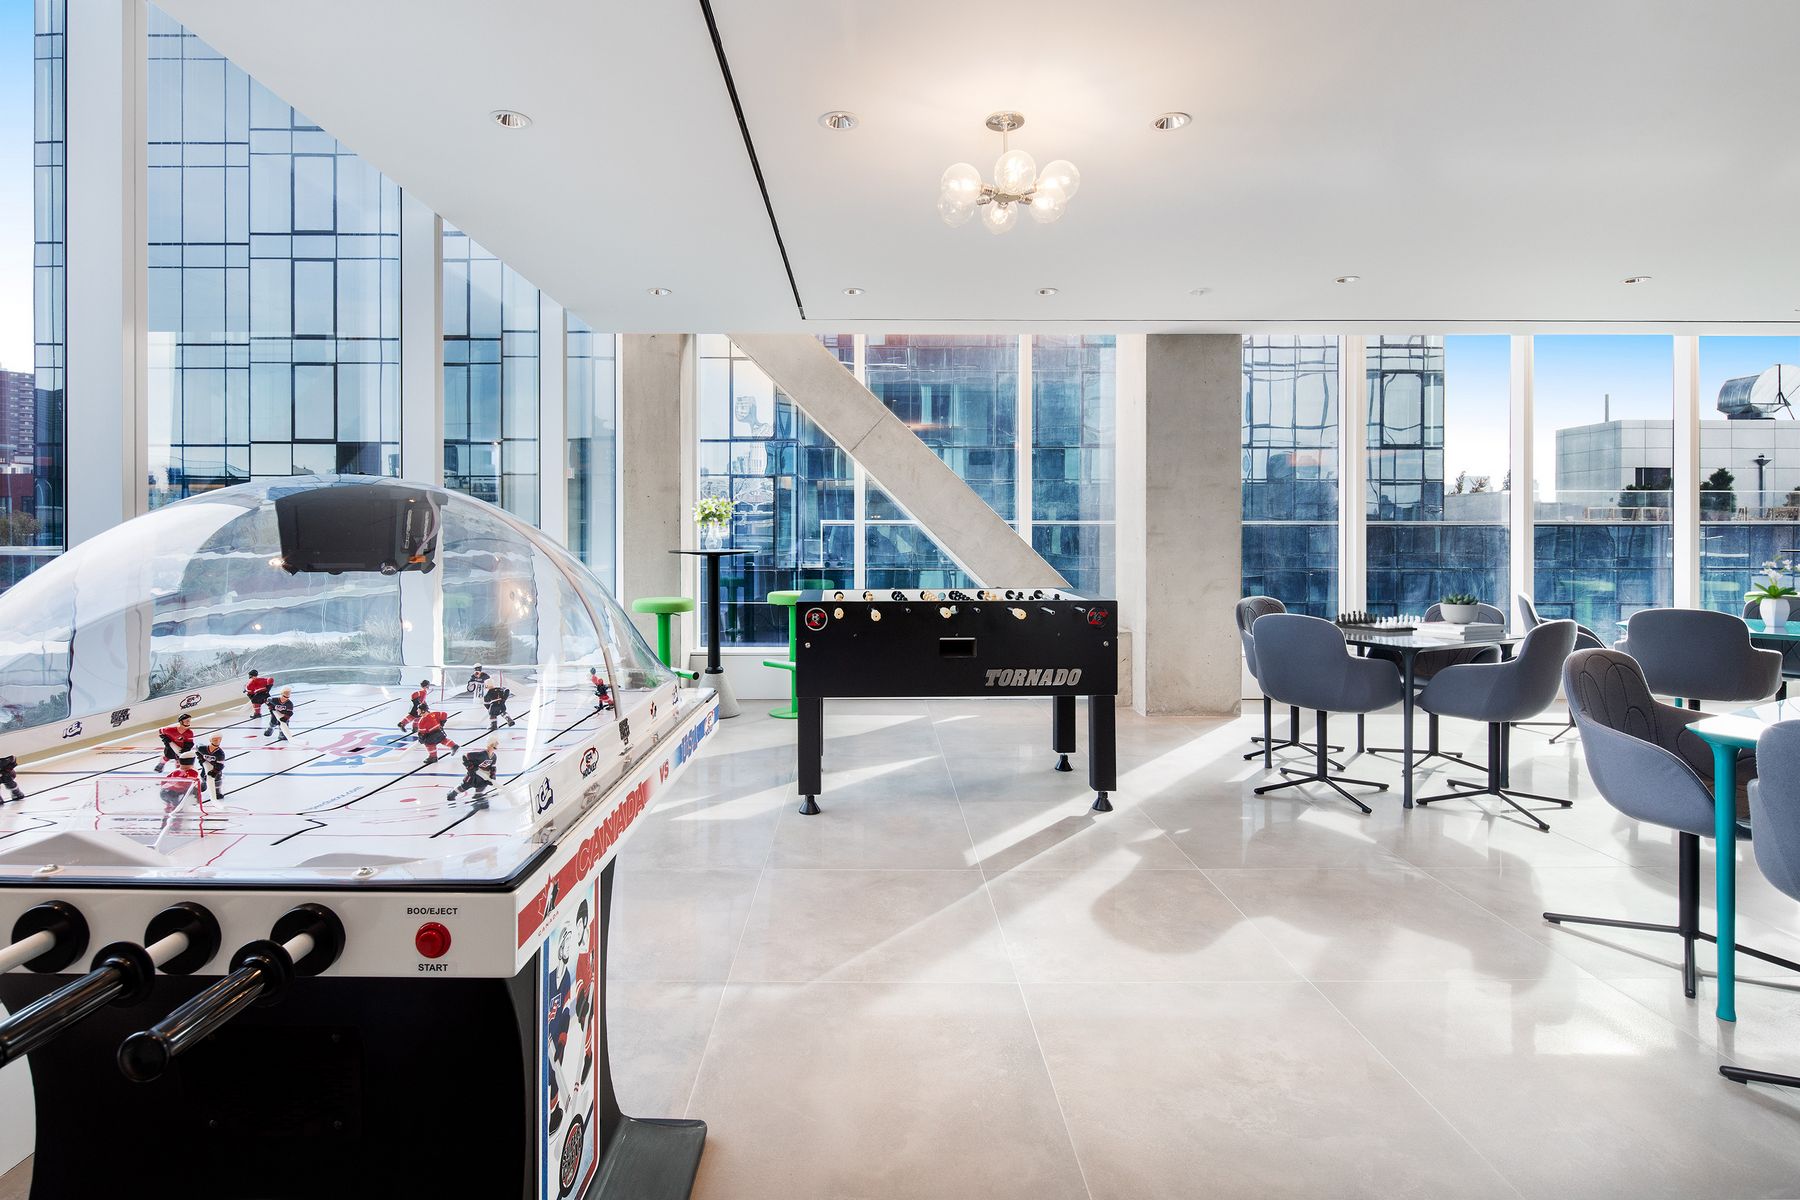 420 Kent - Game lounge with hockey and foosball game tables, chess, tables and seating throughout, bright and spacious with large windows